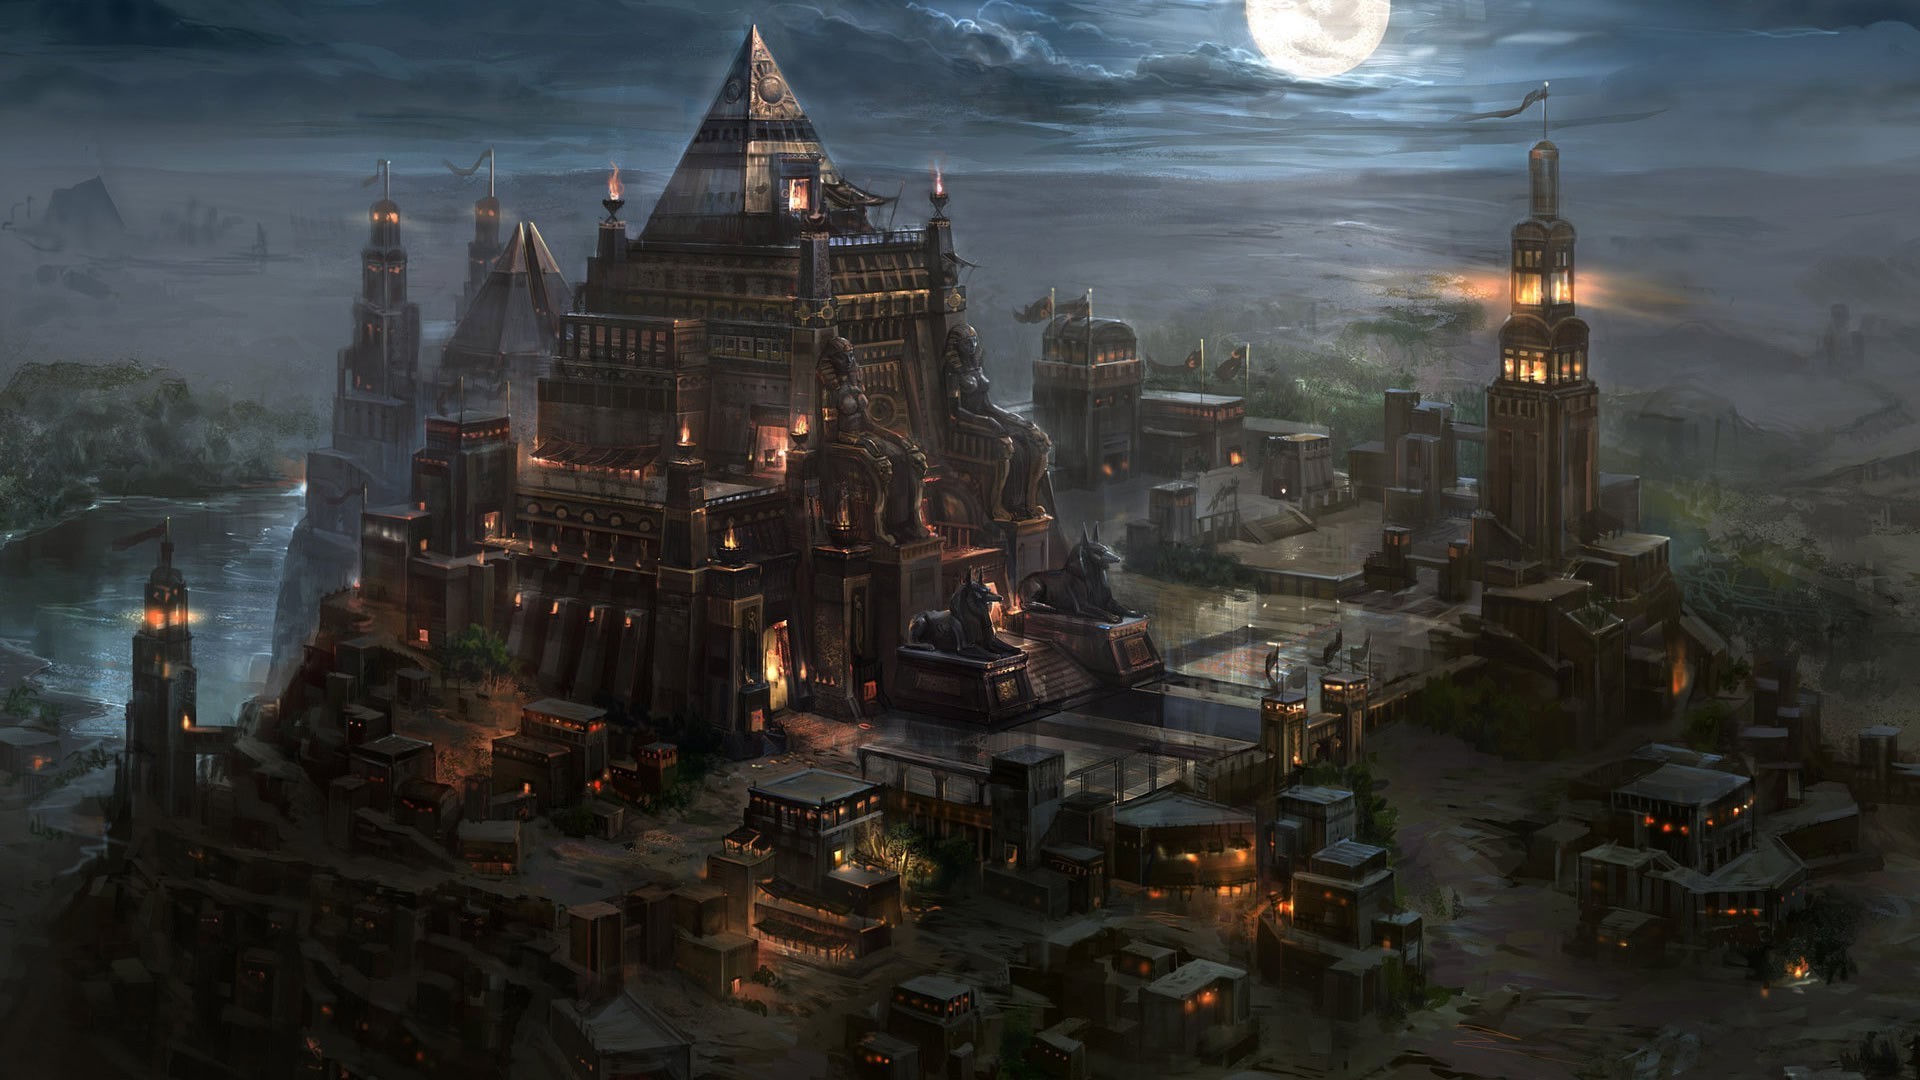 General 1920x1080 artwork fantasy art pyramid temple night moonlight Moon building architecture Egyptian high angle oriental